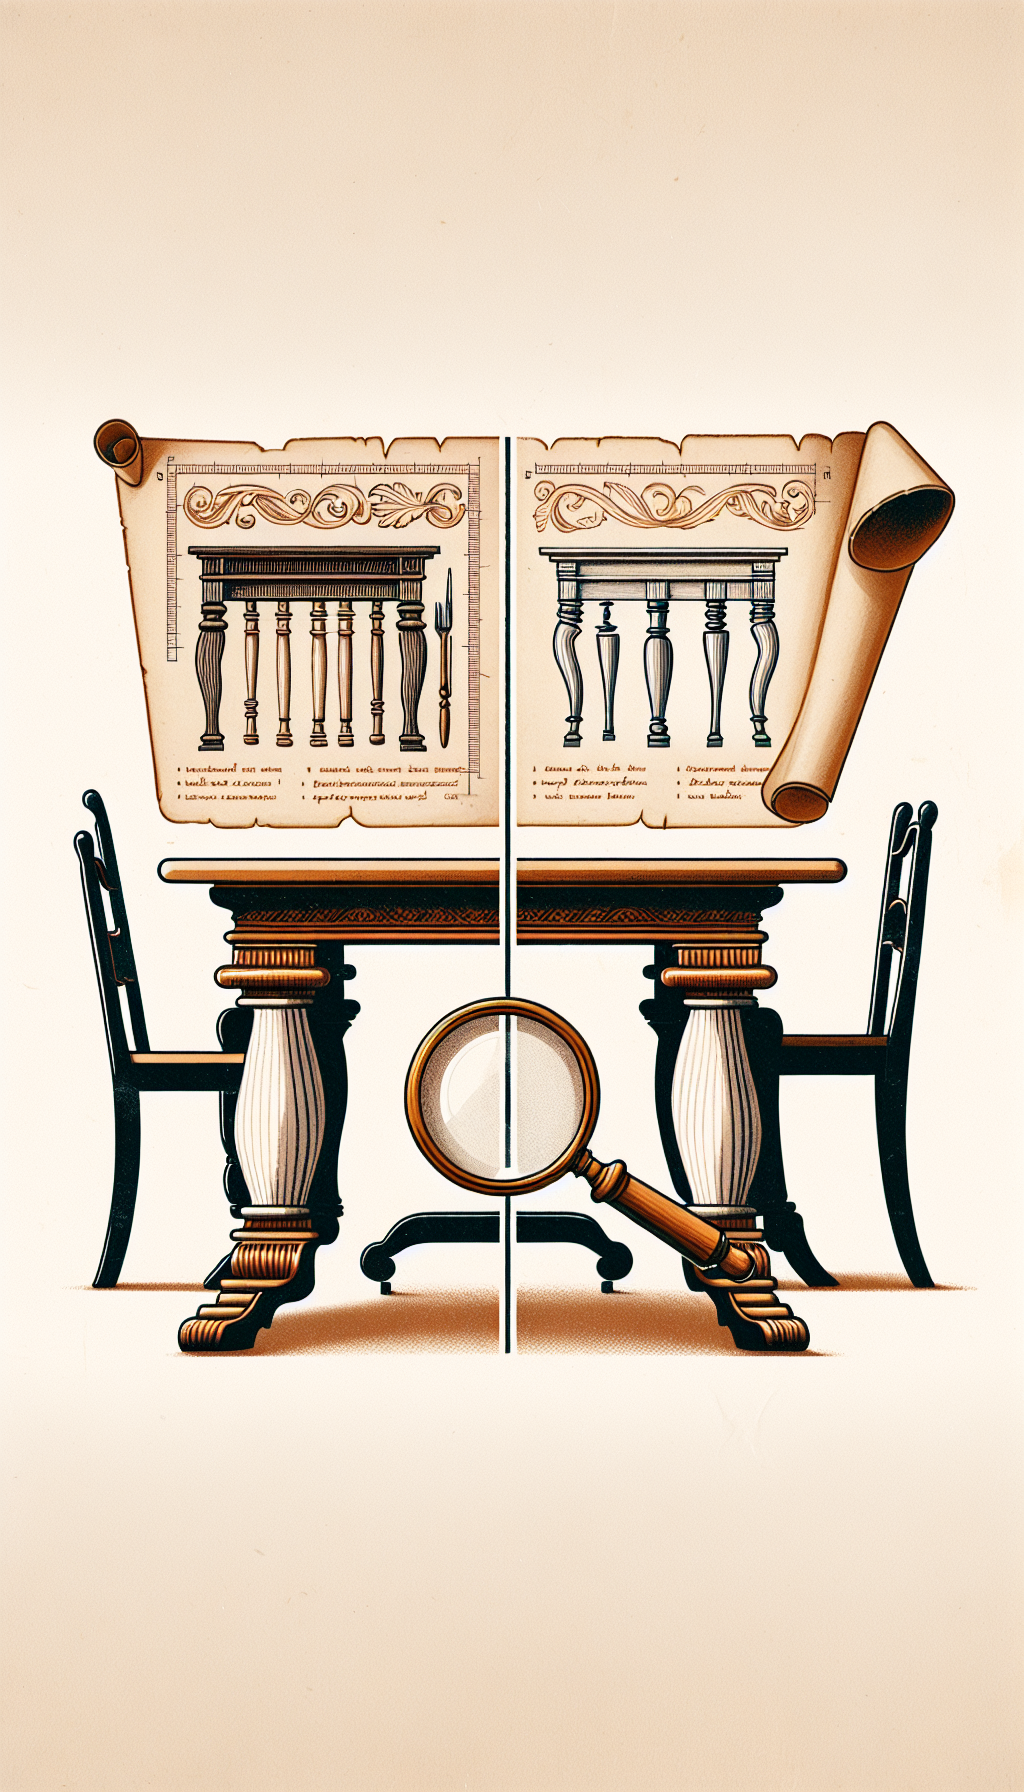 The illustration depicts a half Federal, half Regency-style dining table, where one side showcases the clean, neoclassical lines of a Federal table and the other side exudes the bold, curving Regency elegance. Atop the table, an antique magnifying glass hovers, focusing on the distinct leg styles, with a subtle scroll identifying key features and woodwork intrinsic to each era's design aesthetic.